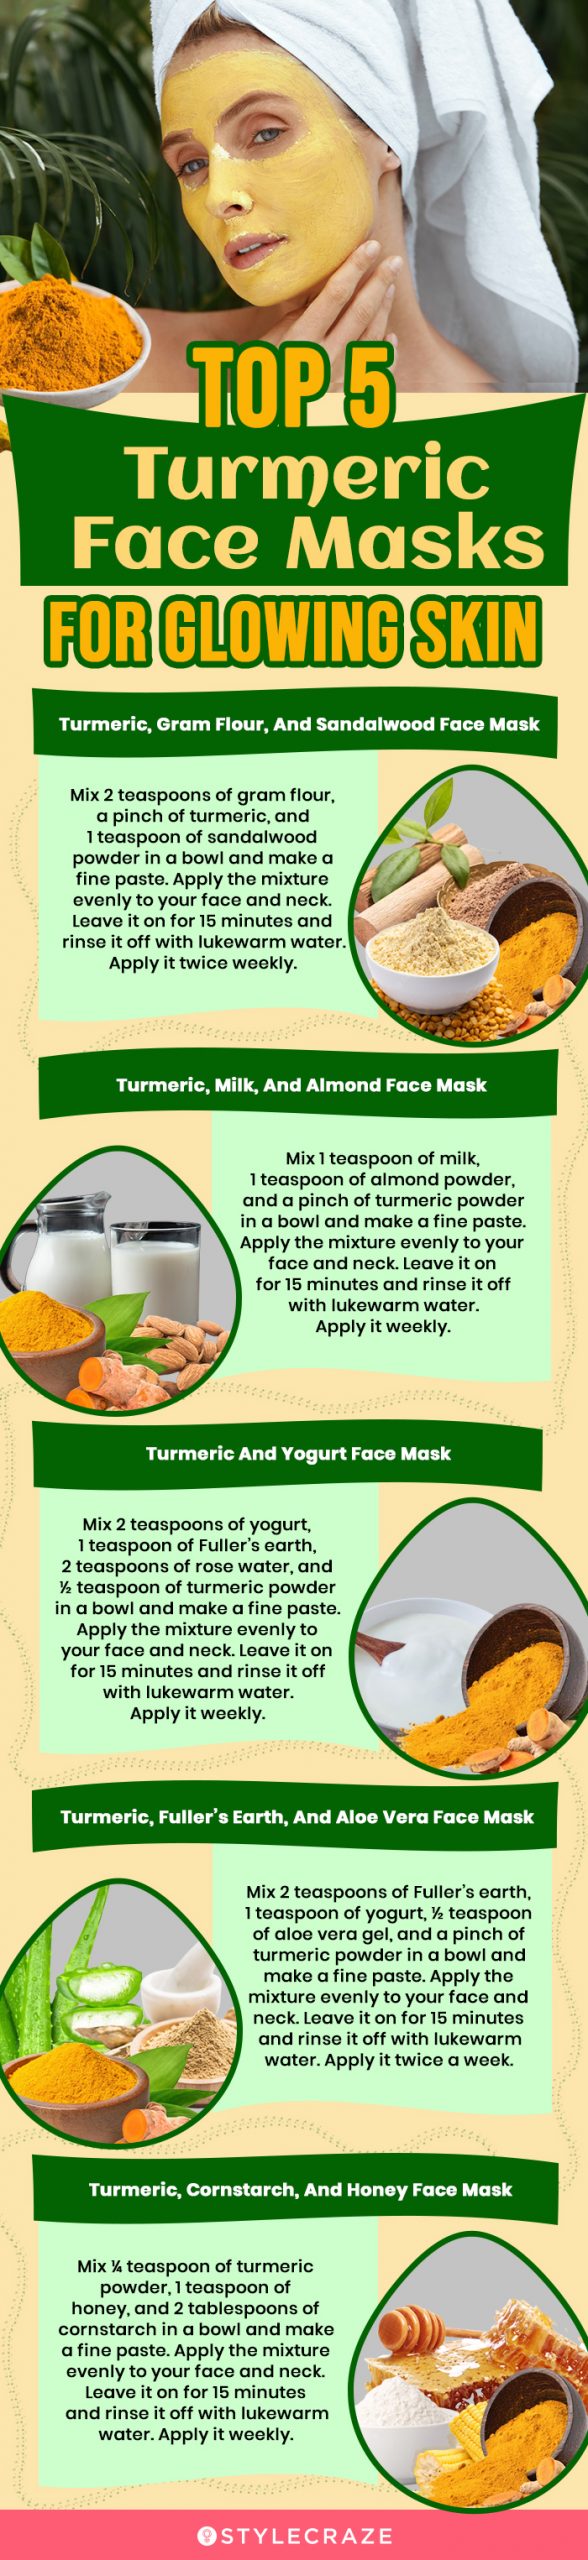 top 5 turmeric face masks for a glowing skin (infographic)